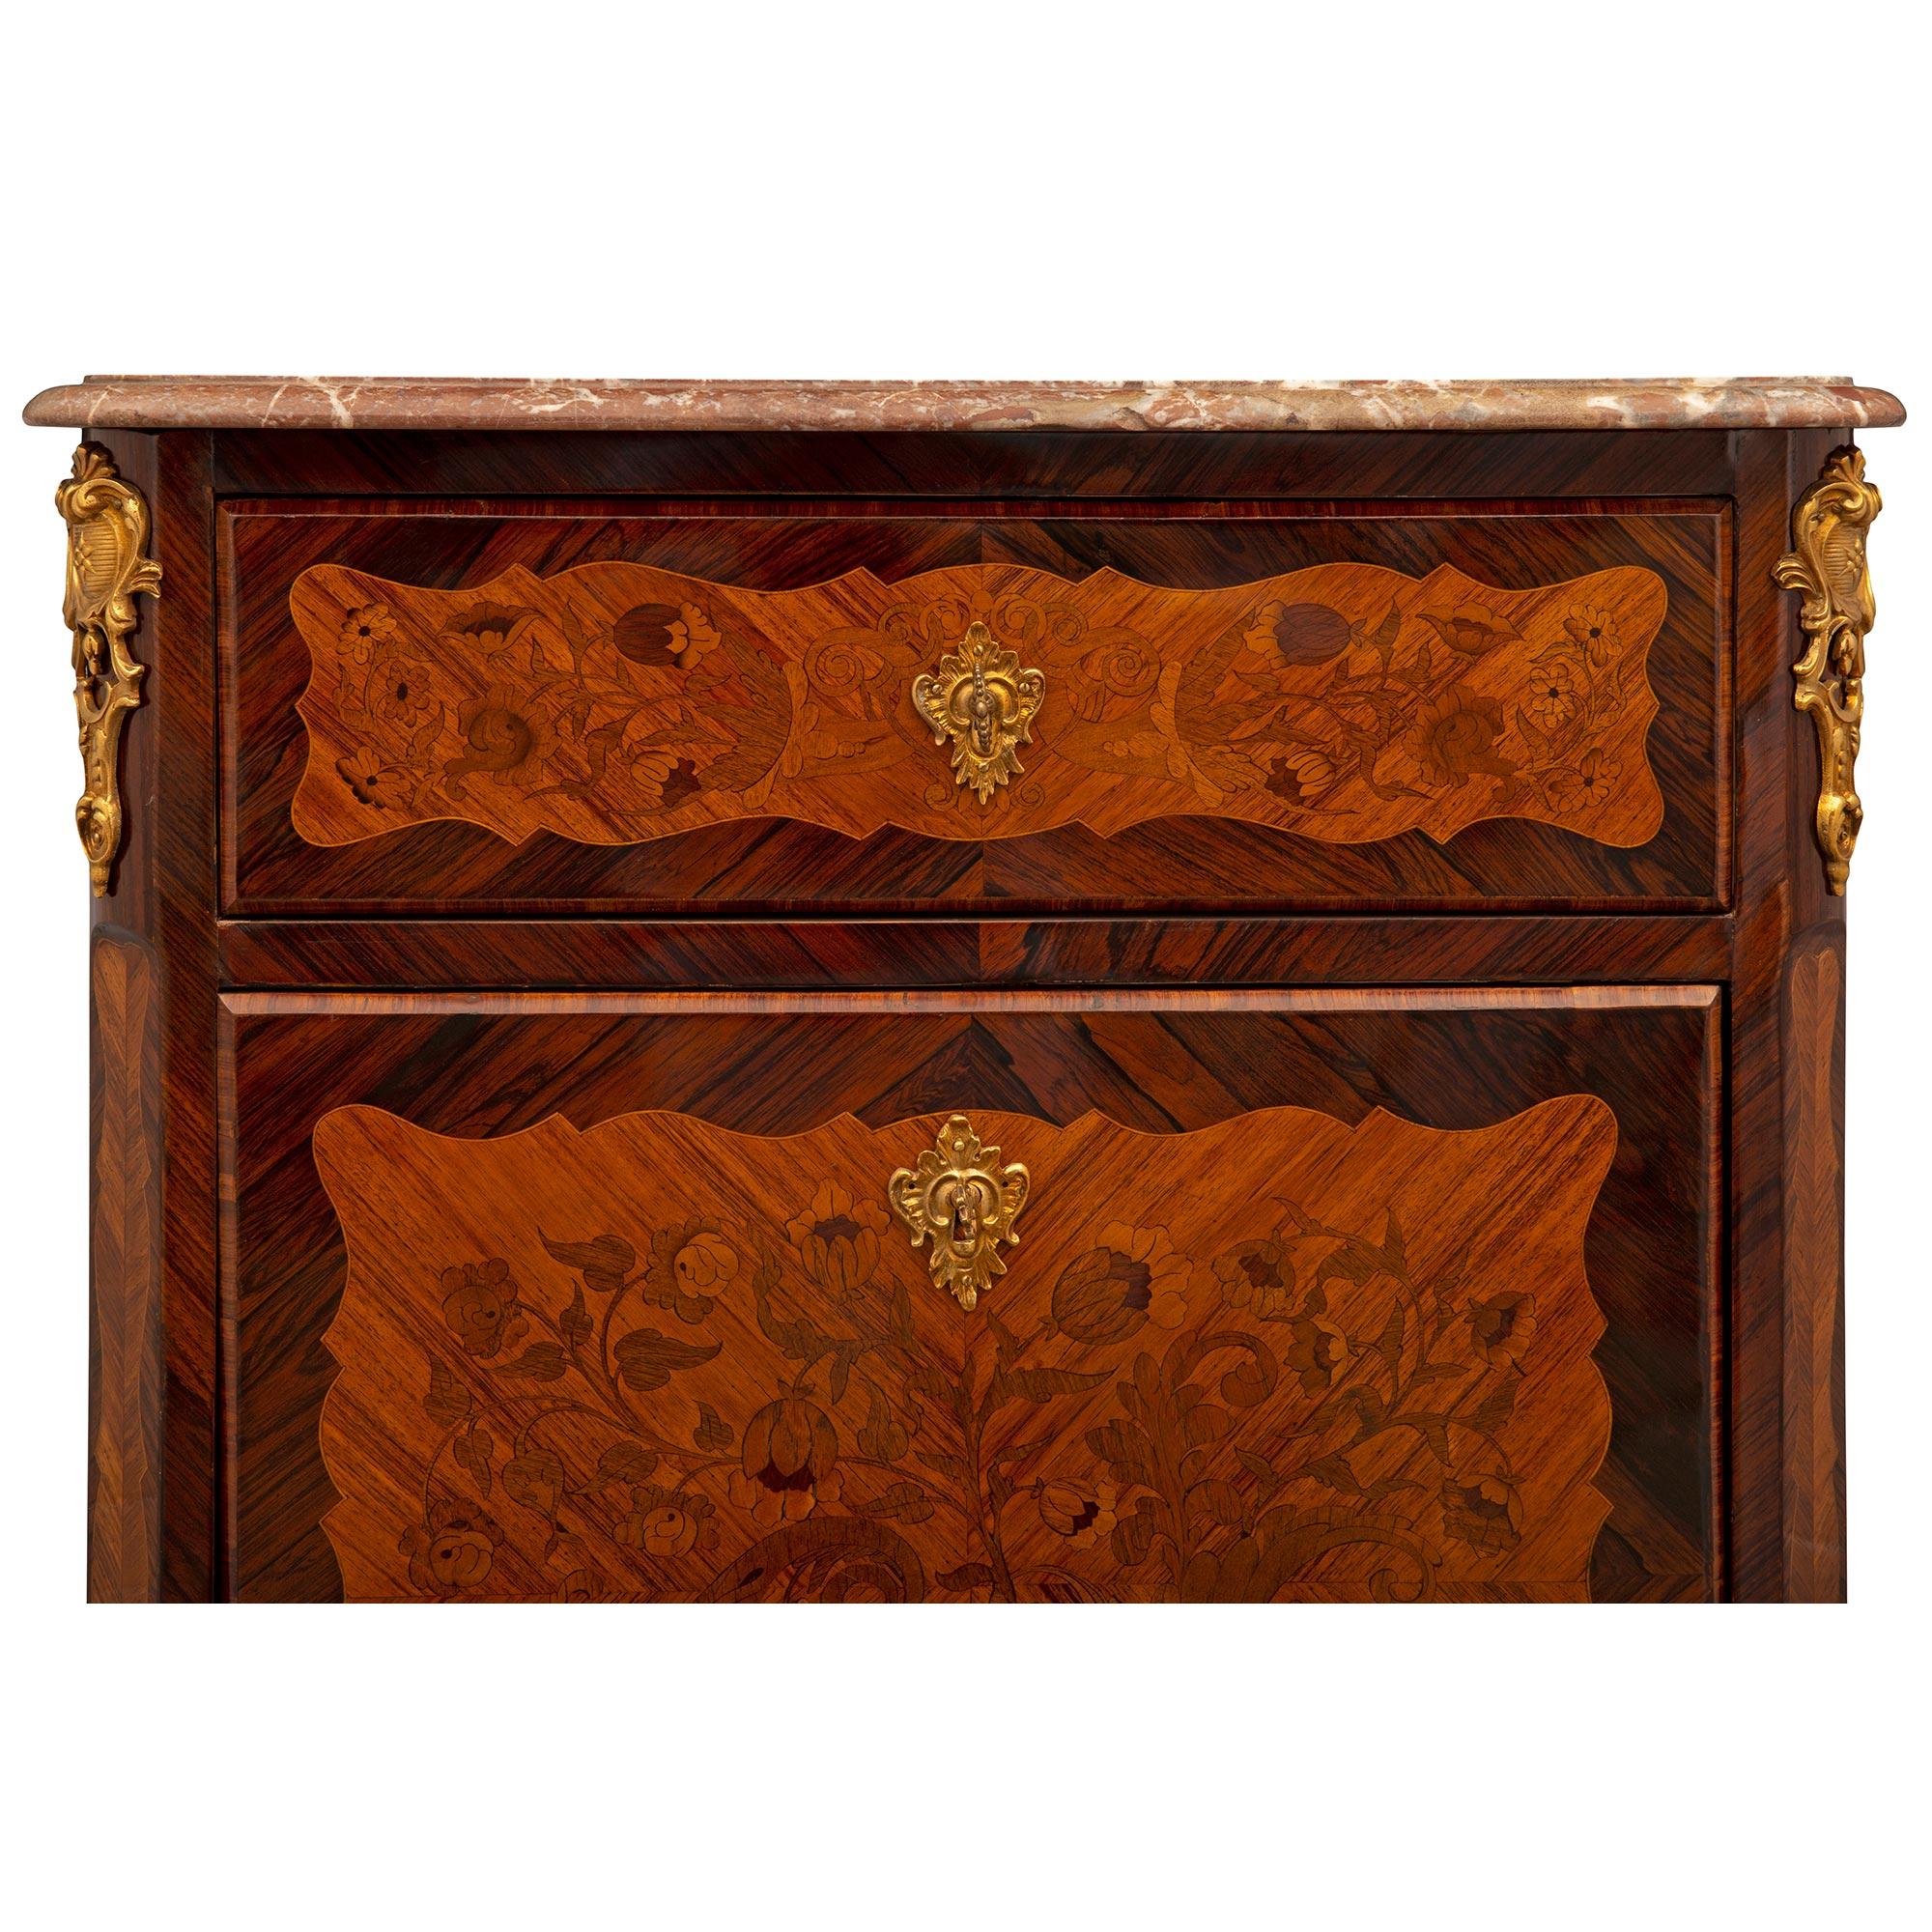 French, 19th Century, Transitional Style Tulipwood and Kingwood Secretary For Sale 3